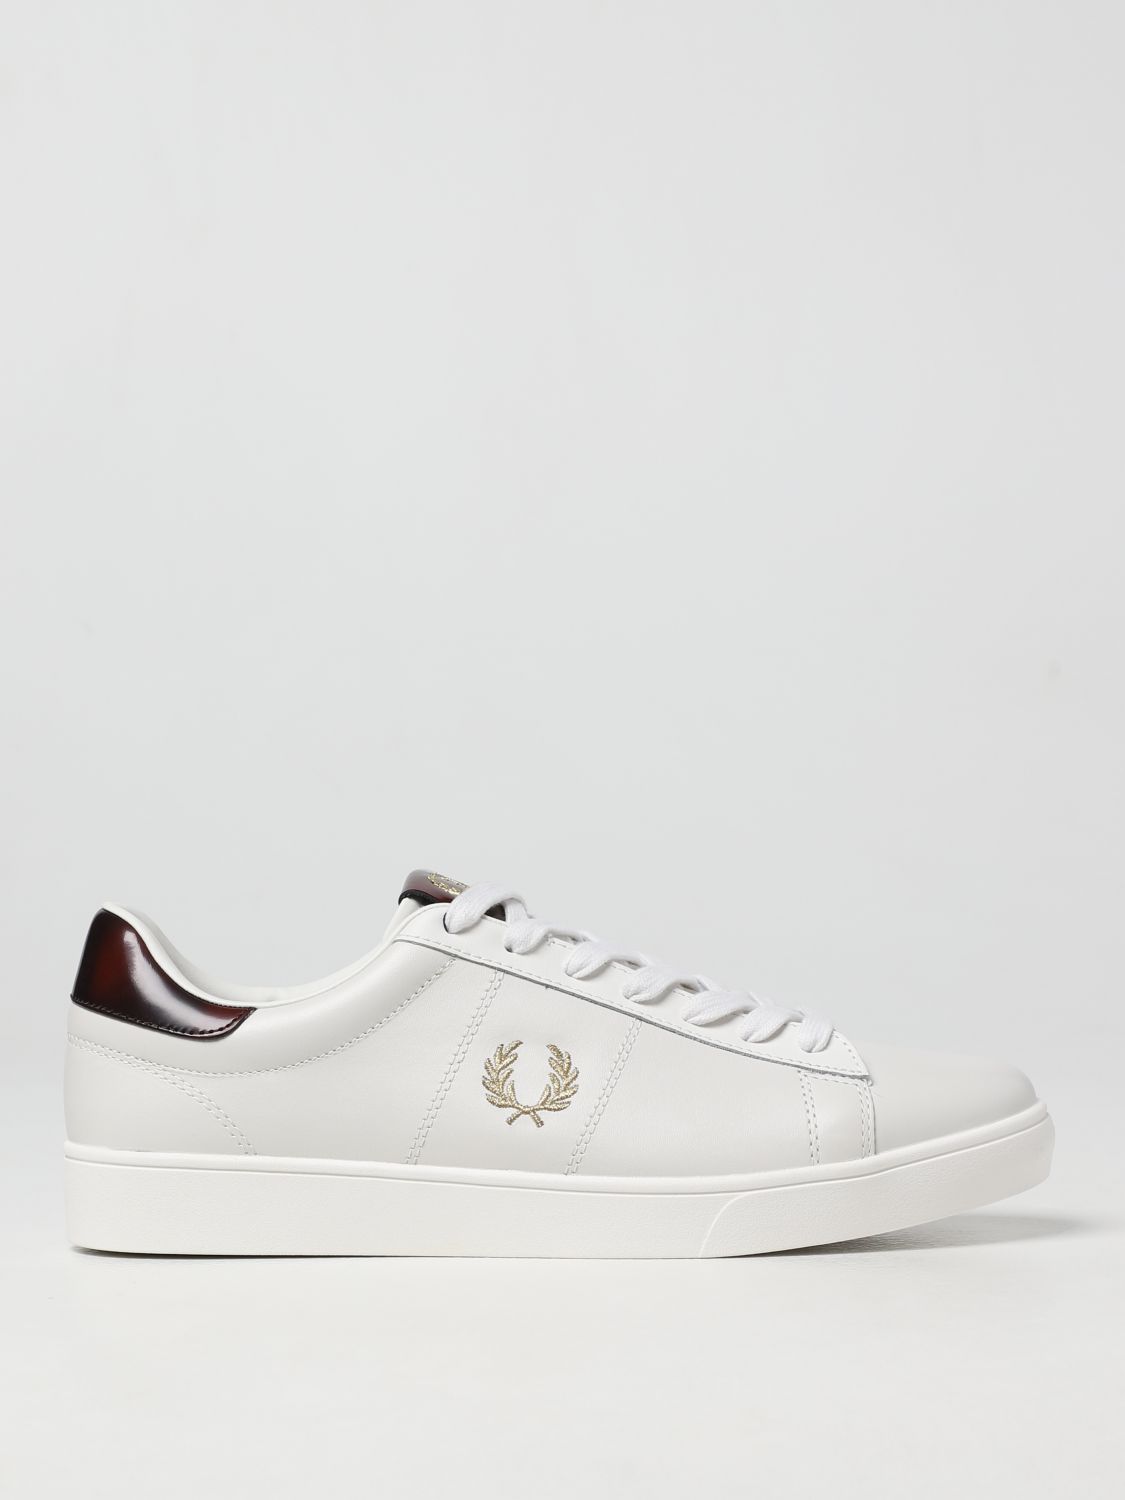 FRED PERRY SPENCER FREDD PERRY LEATHER TRAINERS,C95364044